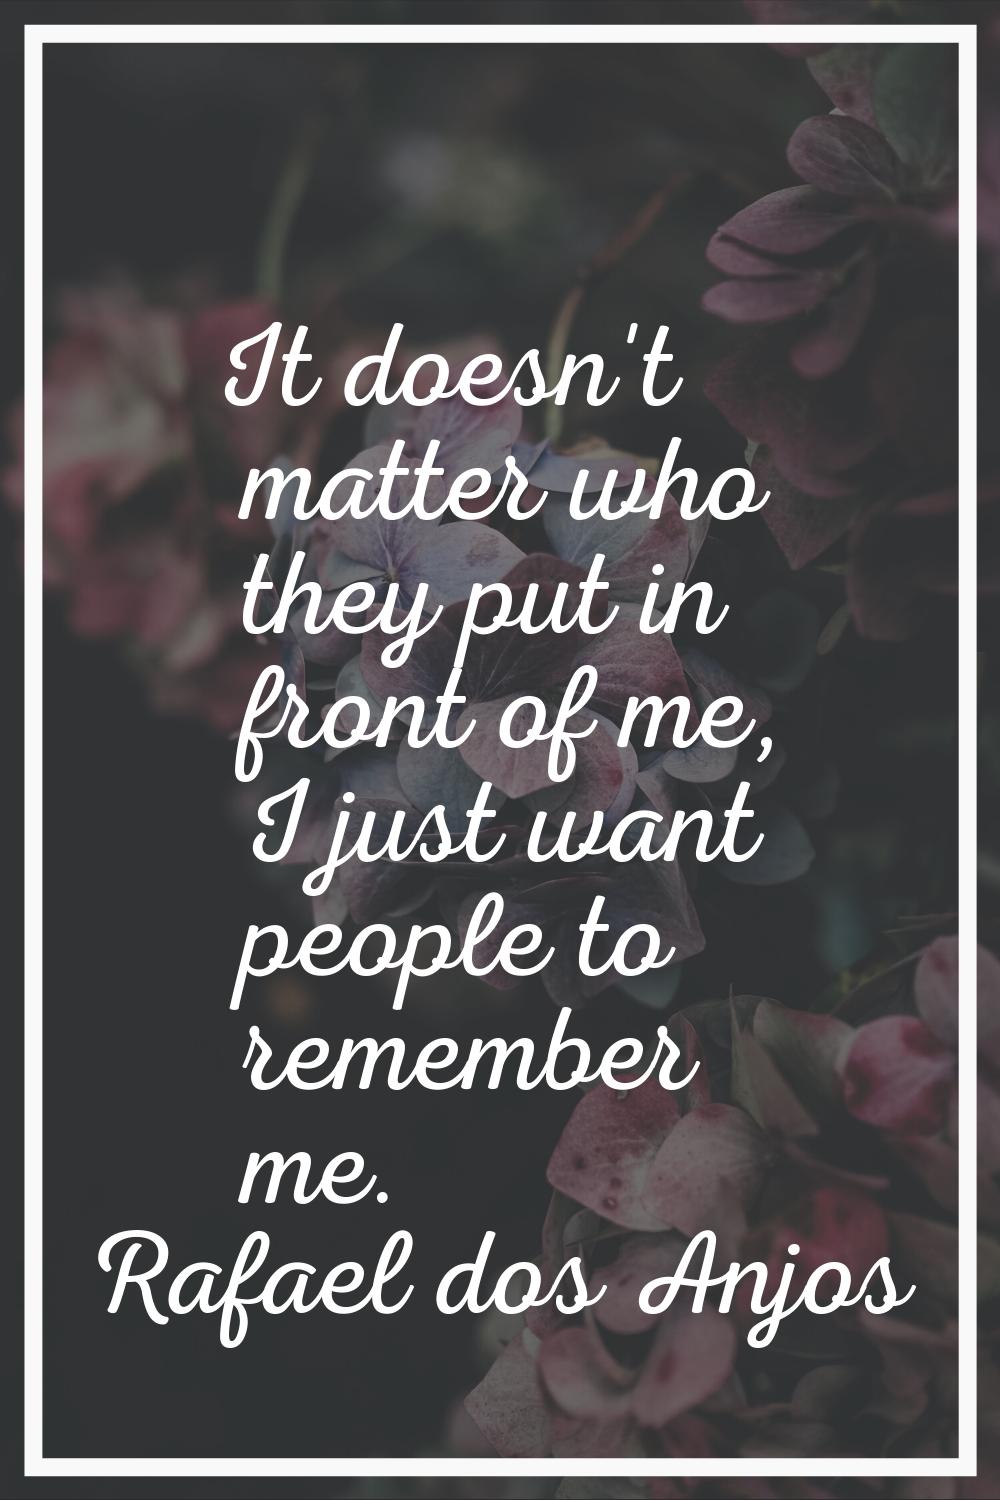 It doesn't matter who they put in front of me, I just want people to remember me.